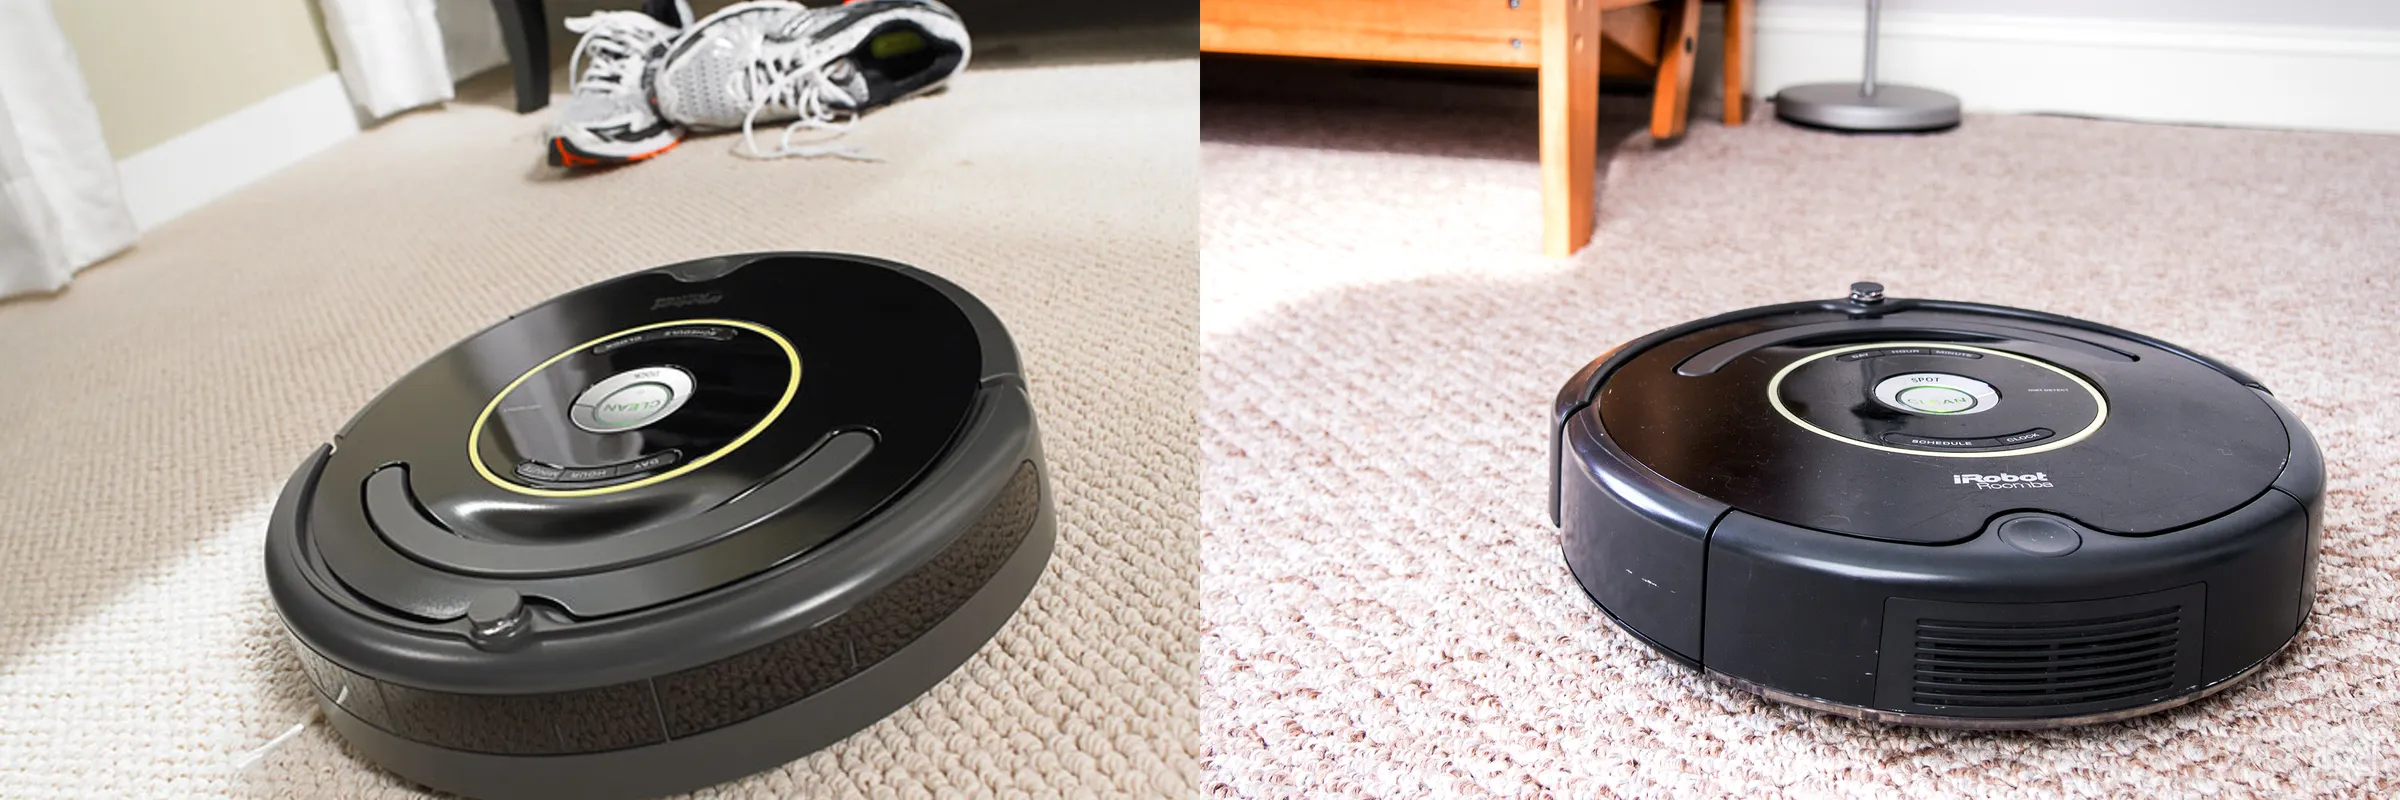 Getting Started Roomba Vacuum Cleaner